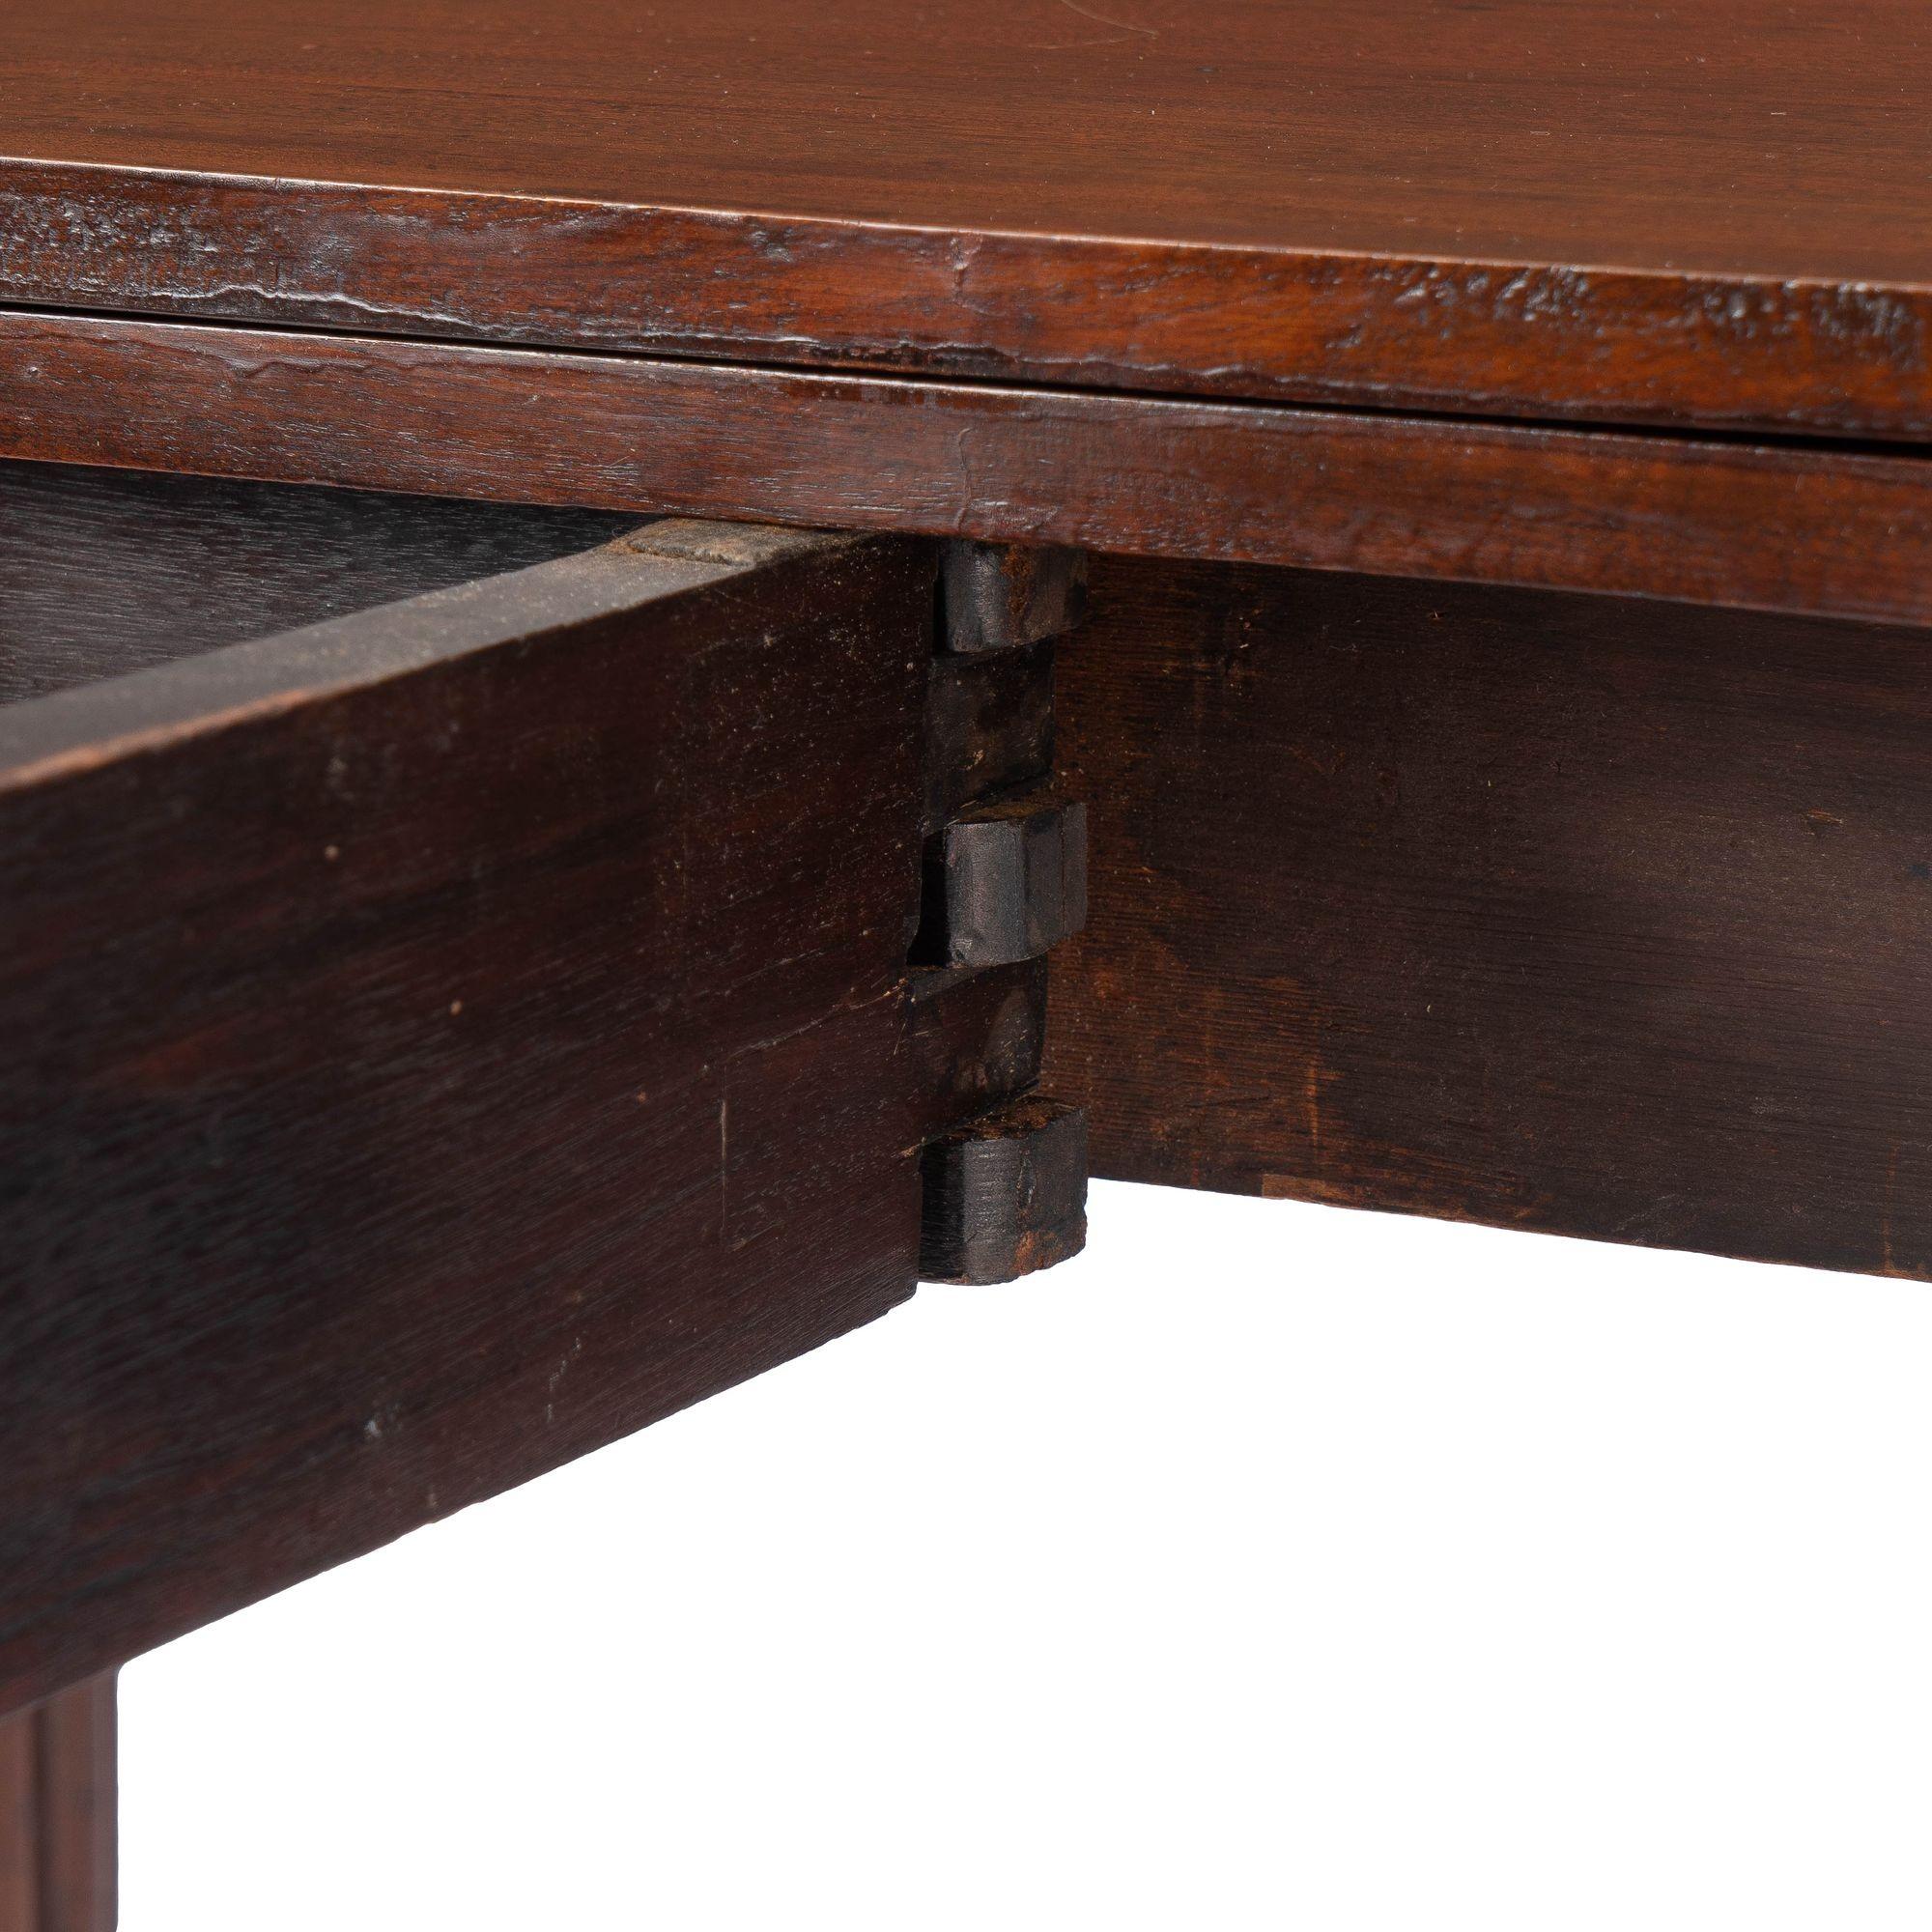 Samuel Field Macintire Attributed Mahogany Flip Top Game Table, c. 1810-15 For Sale 6